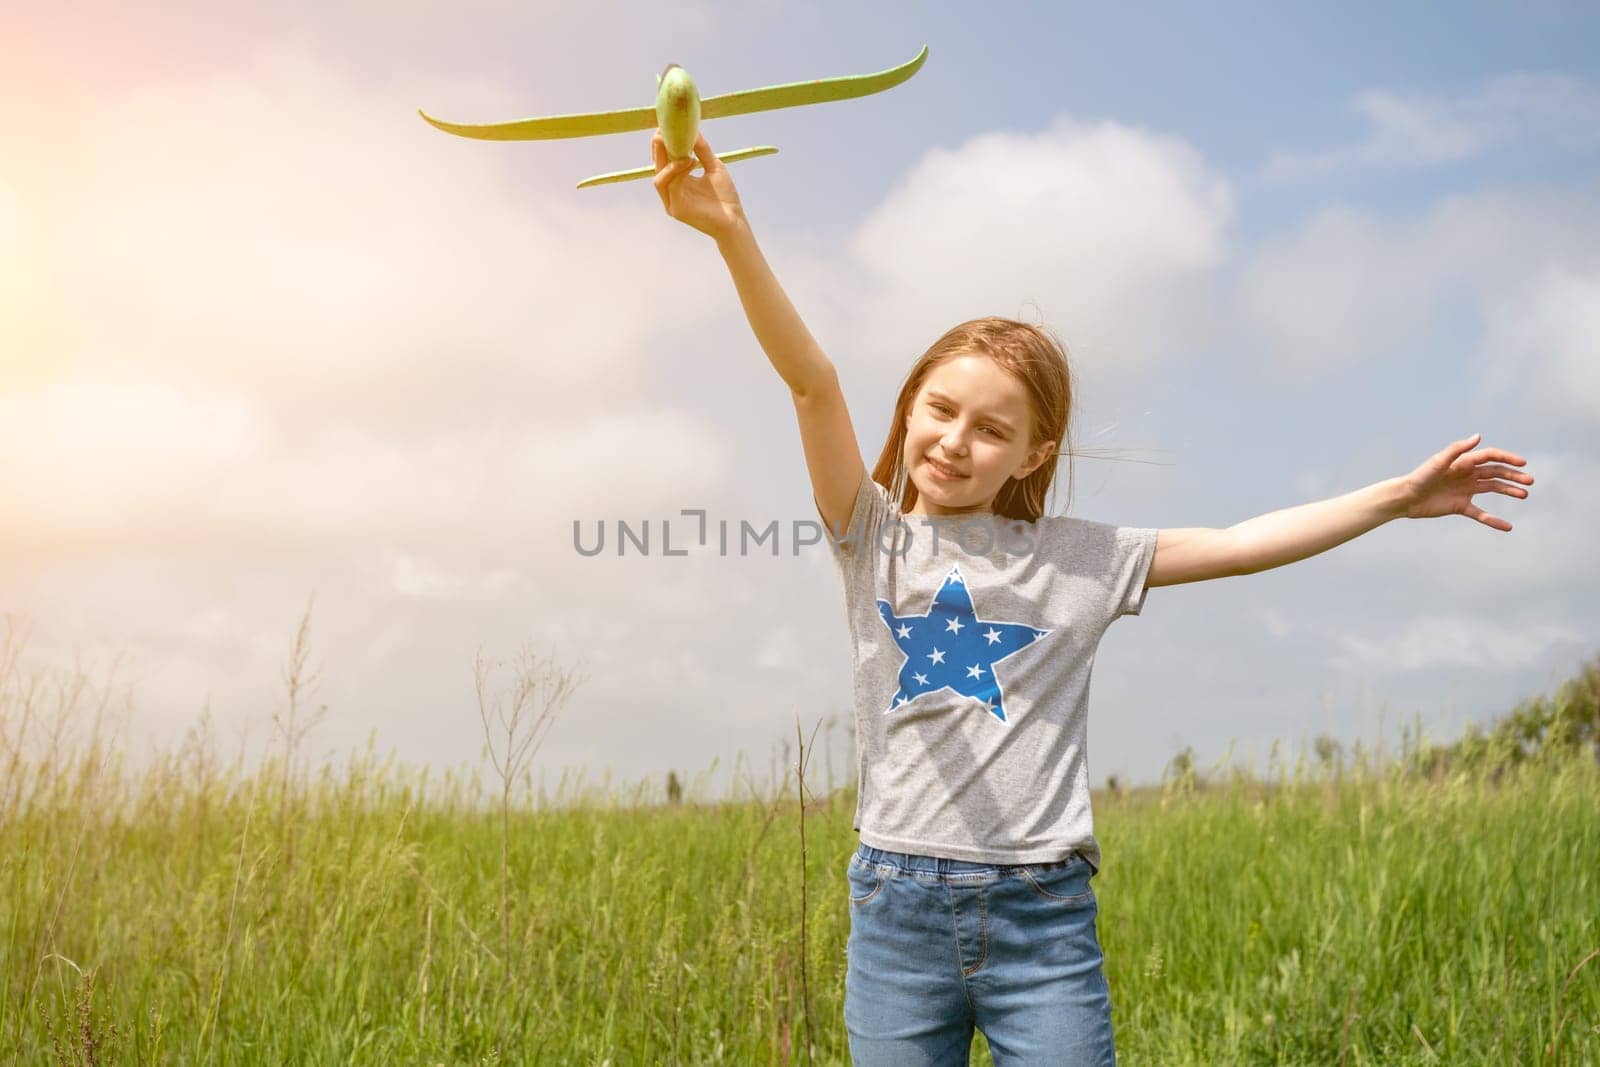 Child playing with toy plane by GekaSkr